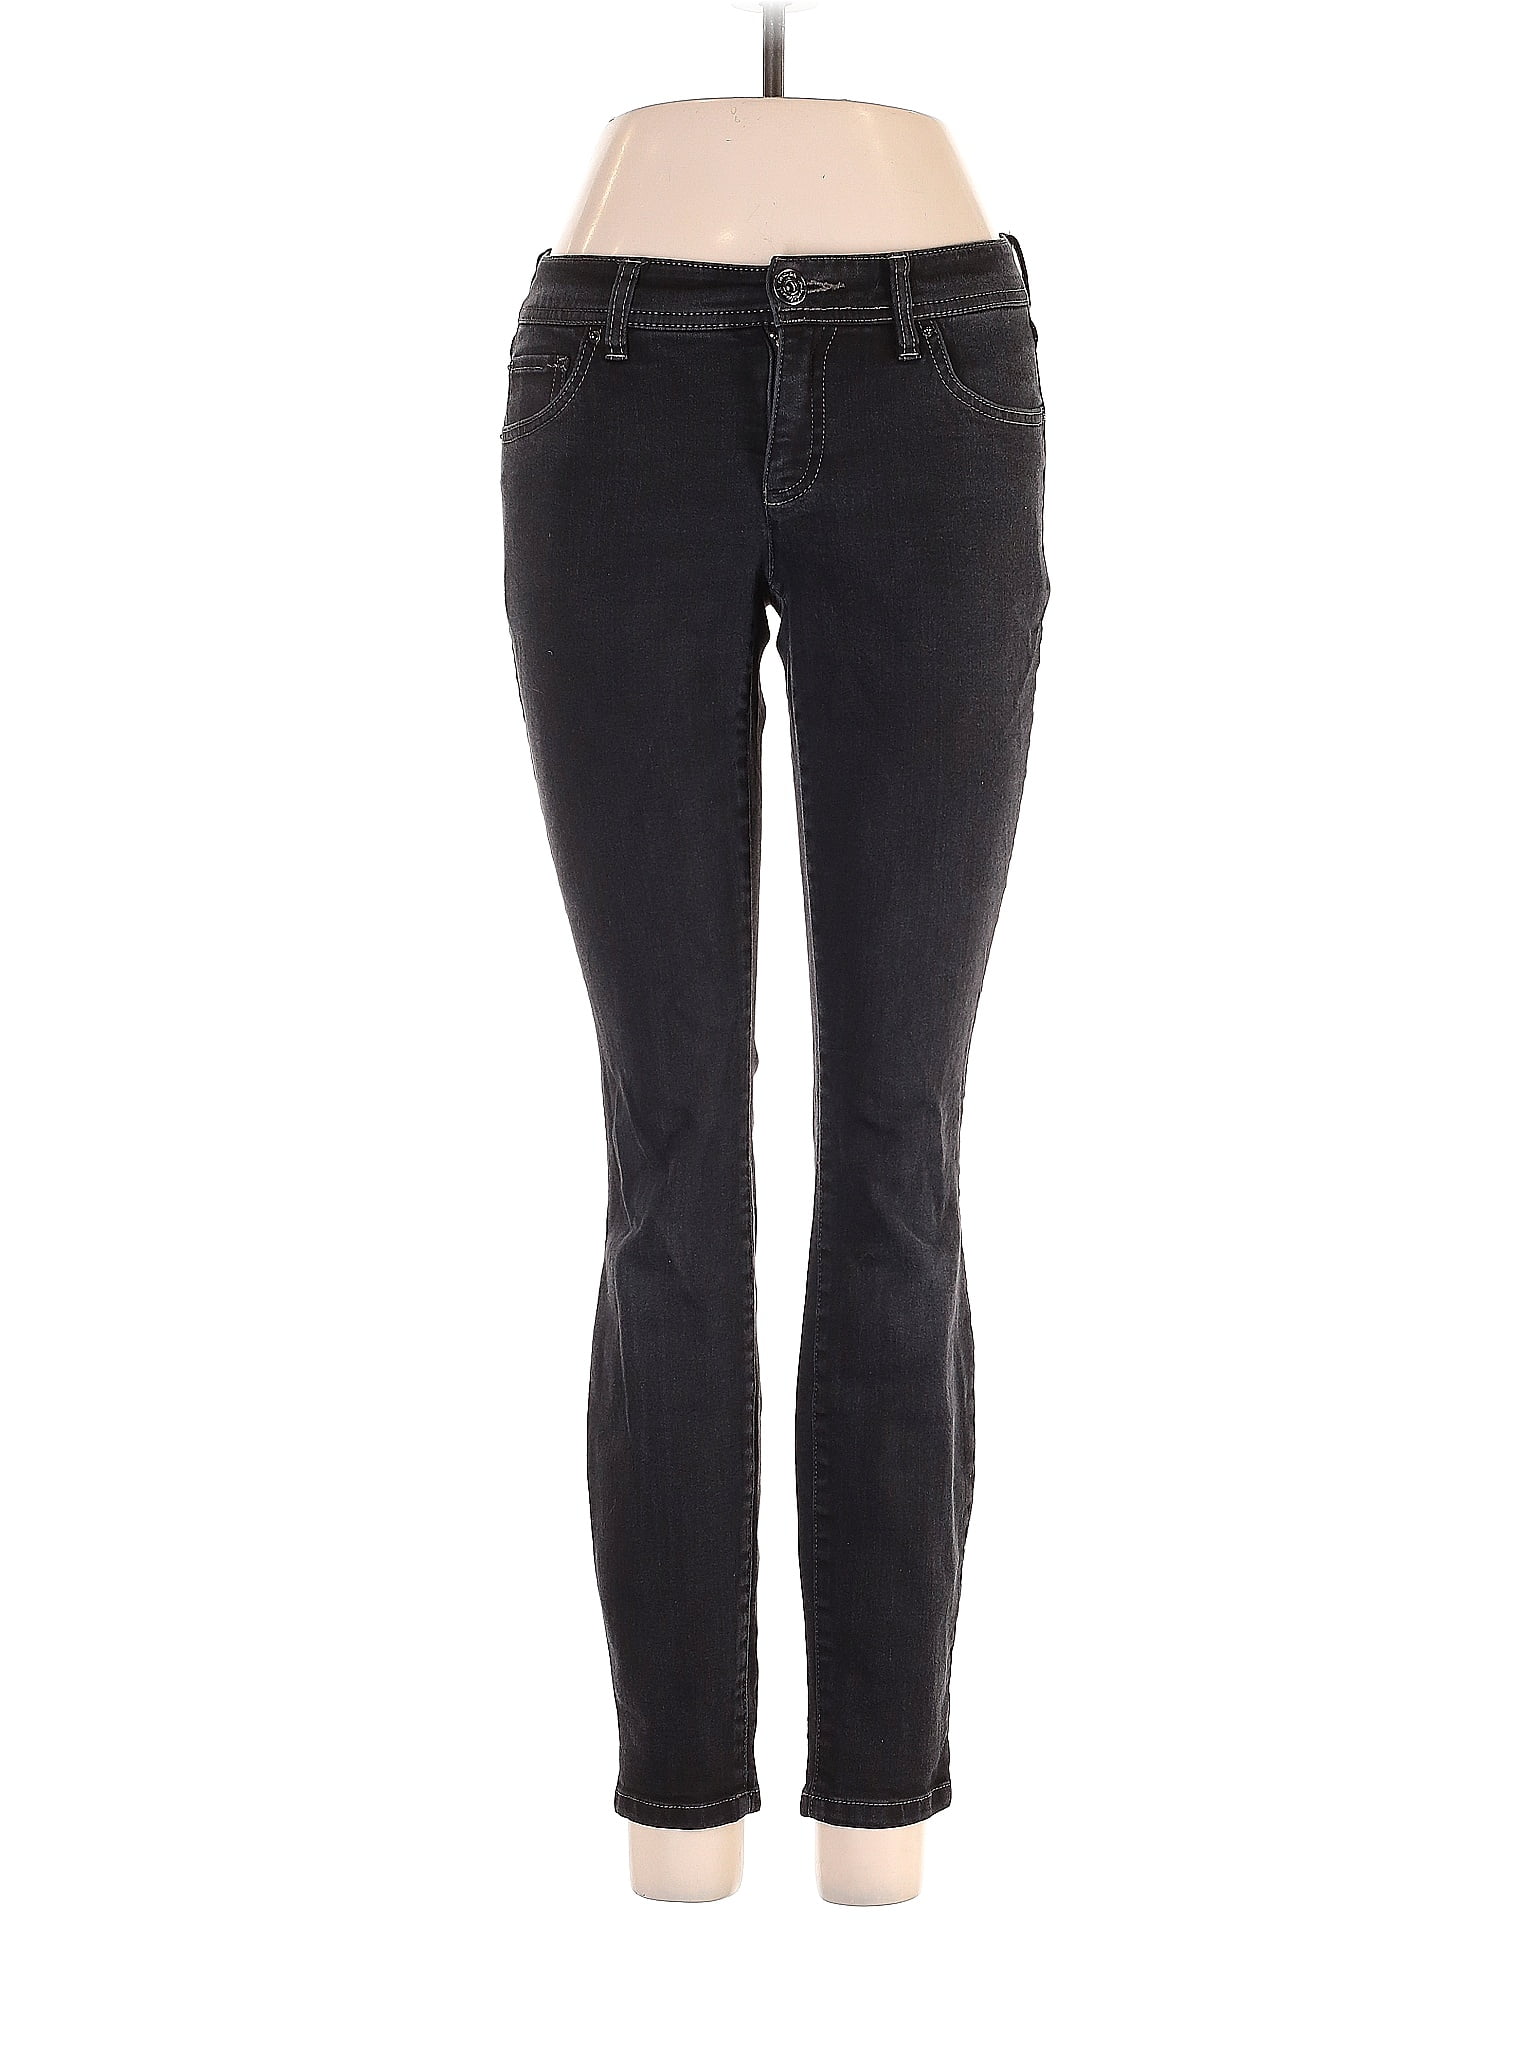 INC International Concepts Solid Black Jeggings Size 2 (Petite) - 69% off